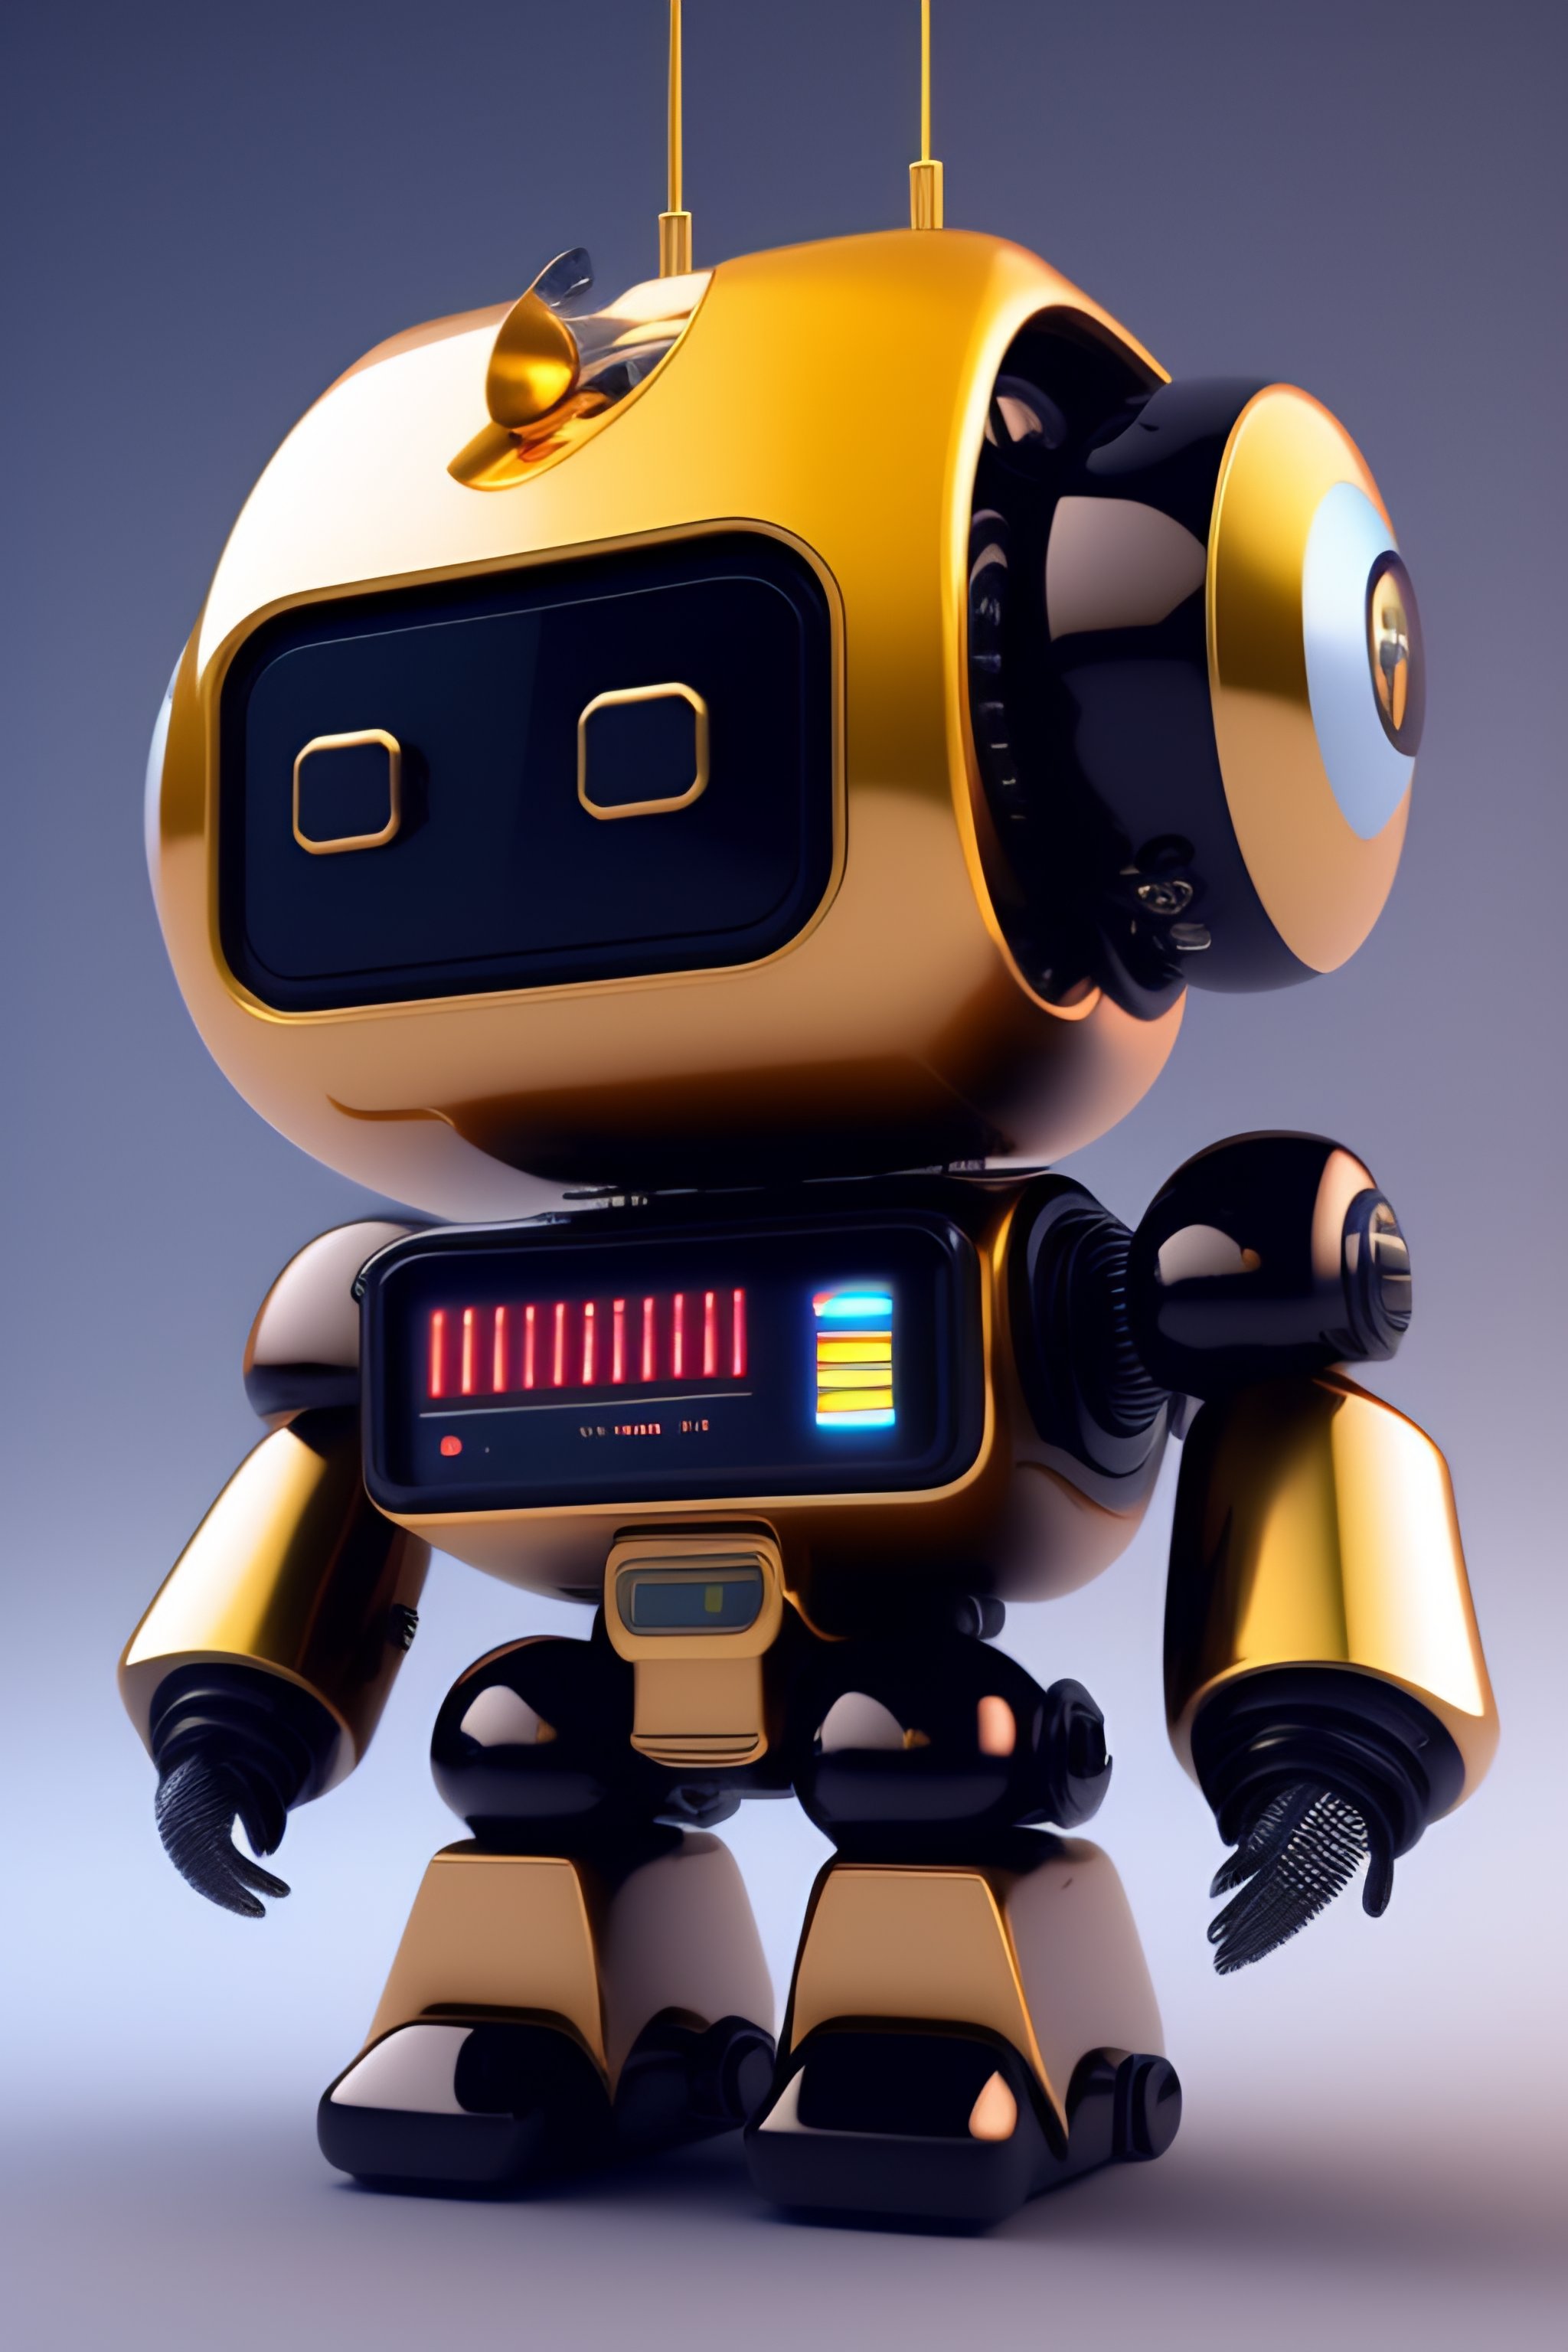 Lexica - A cute robot with a LCD screen for a face made from modular synthesizers, analog synthesizer robot, render